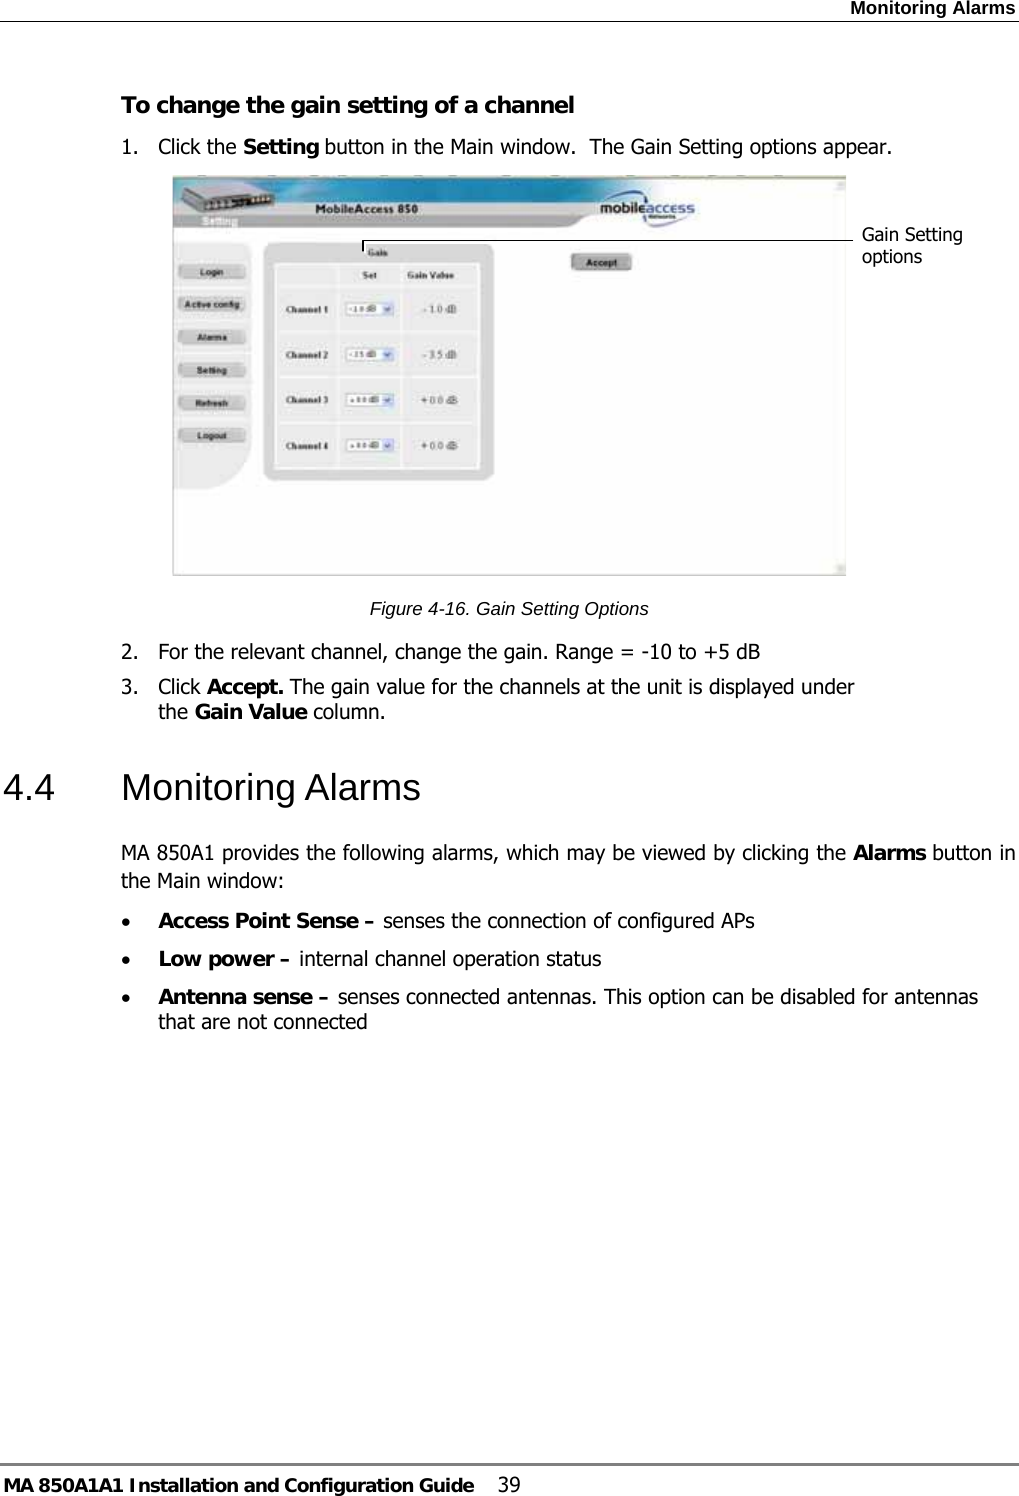 Monitoring Alarms MA 850A1A1 Installation and Configuration Guide  39 To change the gain setting of a channel 1. Click the Setting button in the Main window.  The Gain Setting options appear.  Figure  4-16. Gain Setting Options 2. For the relevant channel, change the gain. Range = -10 to +5 dB 3. Click Accept. The gain value for the channels at the unit is displayed under the Gain Value column. 4.4 Monitoring Alarms MA 850A1 provides the following alarms, which may be viewed by clicking the Alarms button in the Main window:  • Access Point Sense – senses the connection of configured APs • Low power – internal channel operation status • Antenna sense – senses connected antennas. This option can be disabled for antennas that are not connected  Gain Setting options 